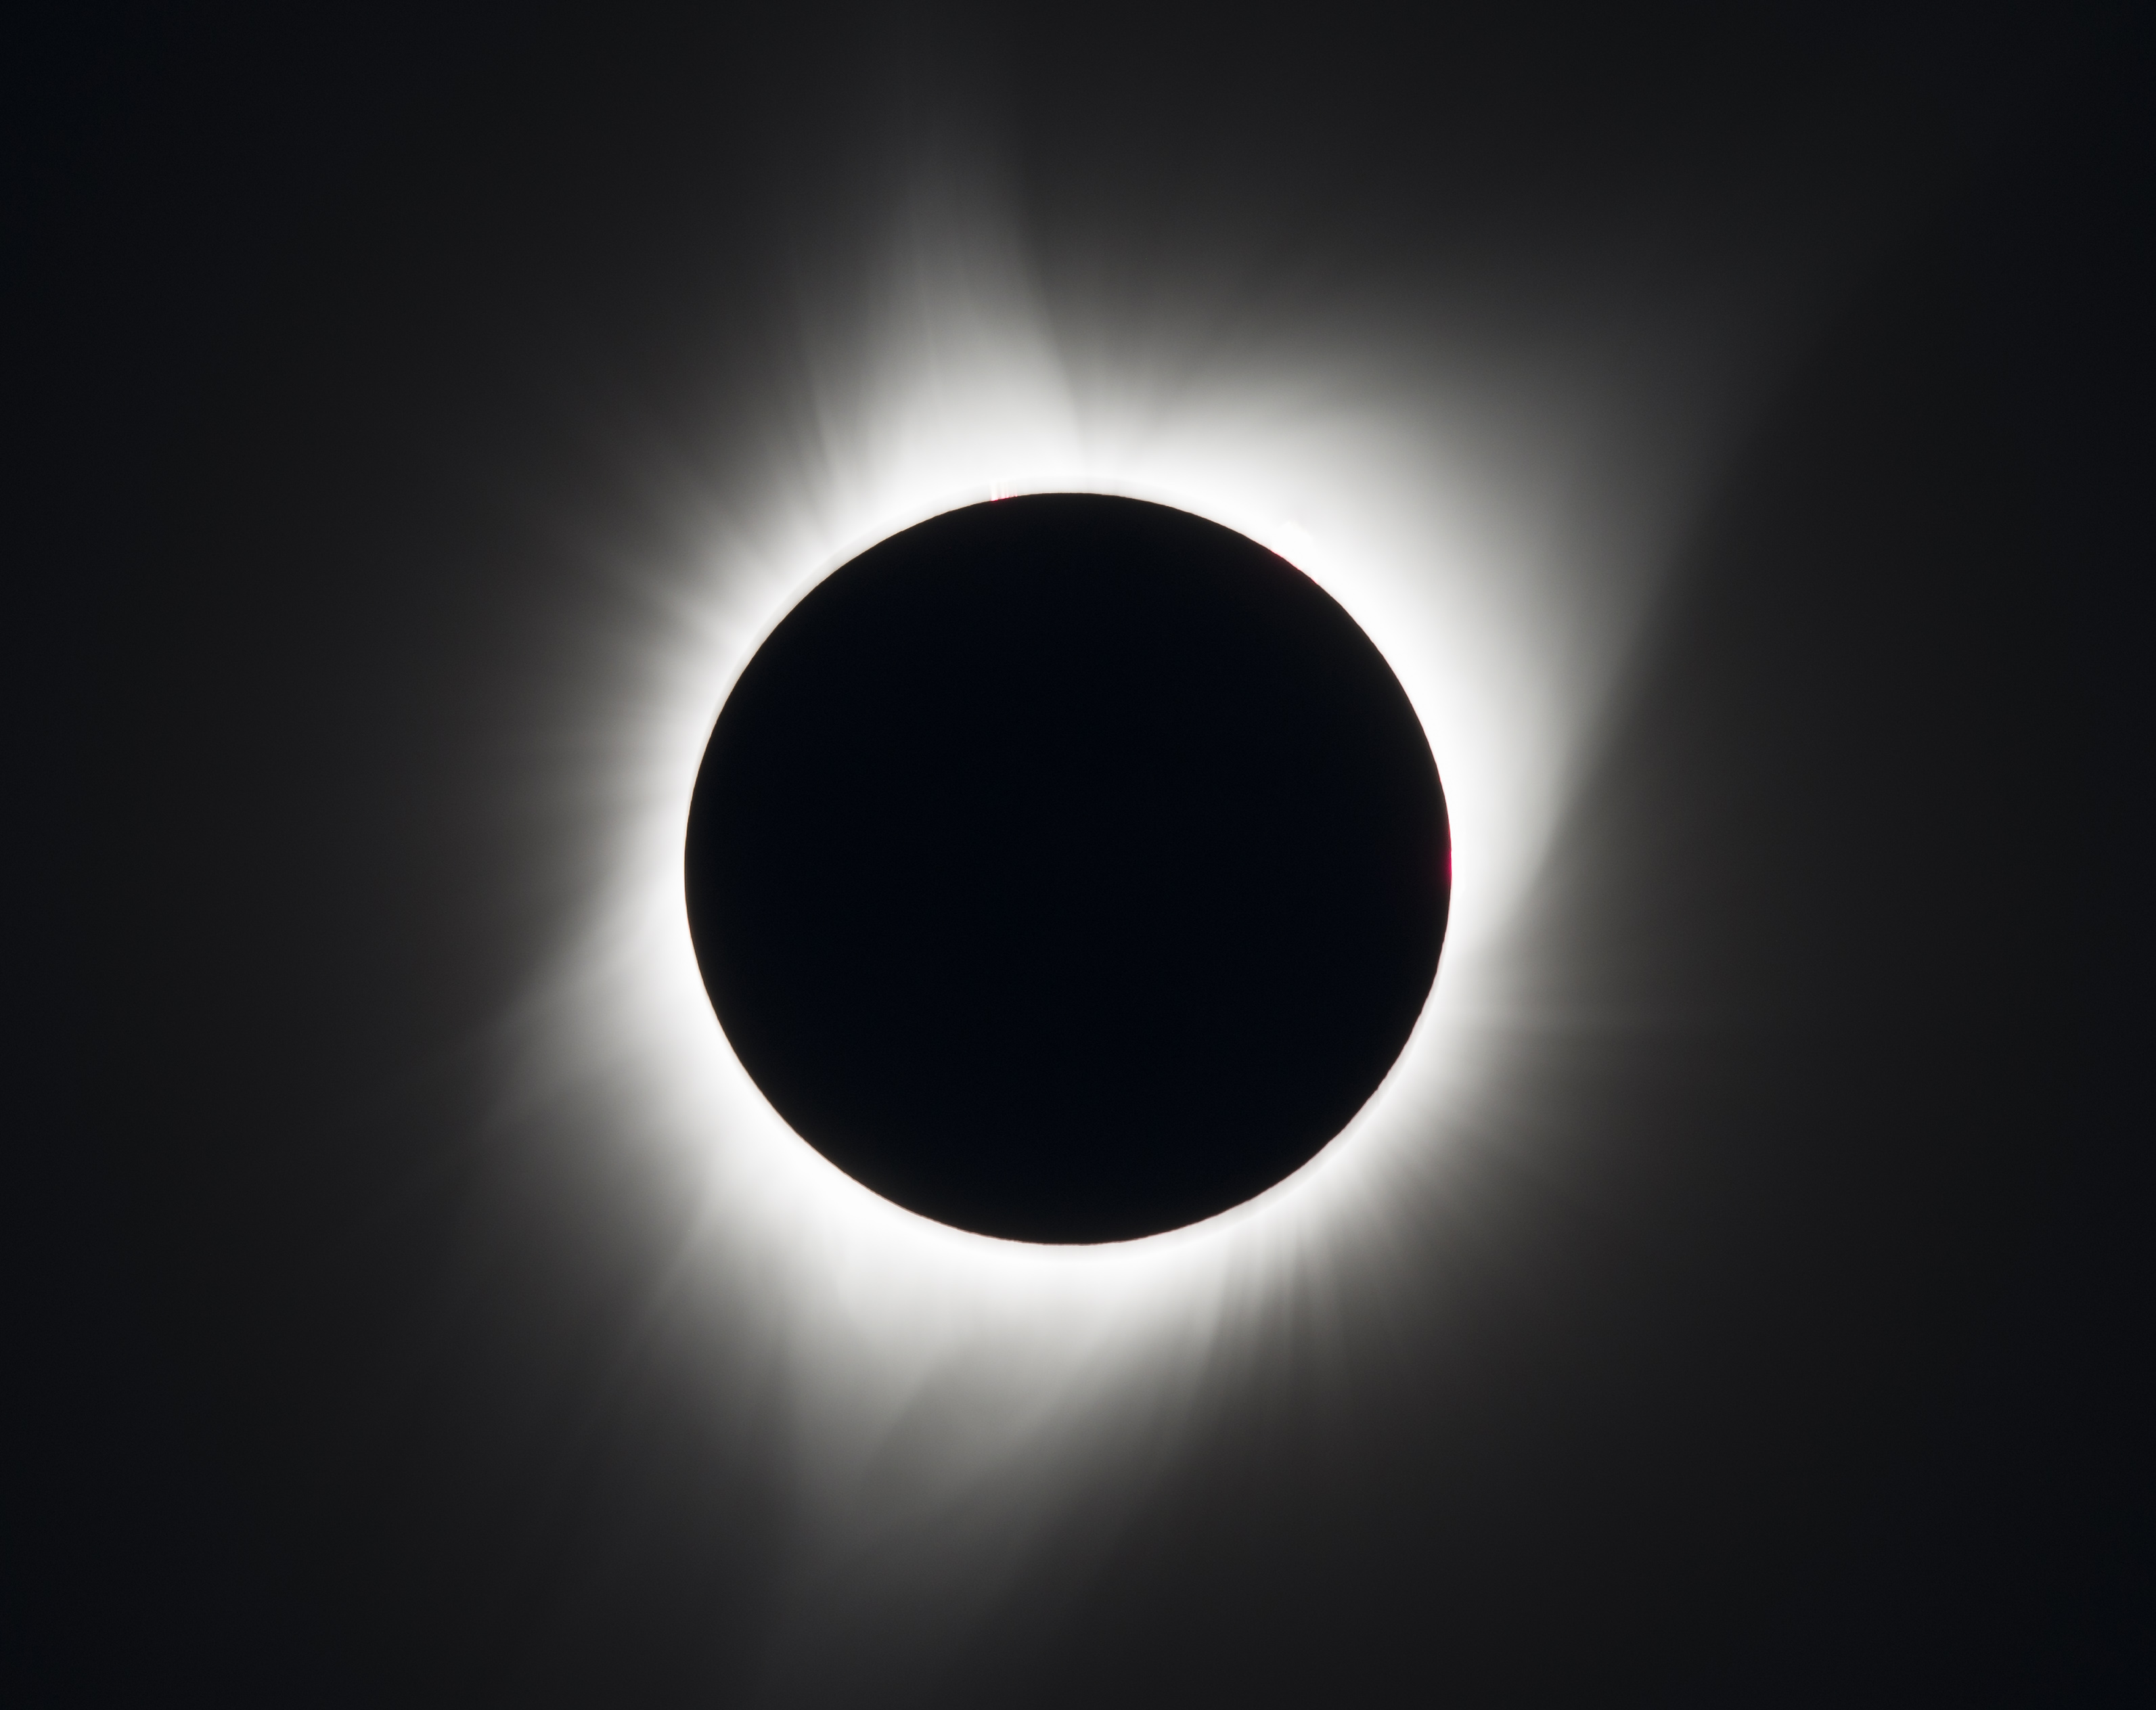 sun blocked by moon in total eclipse, with just corona visible